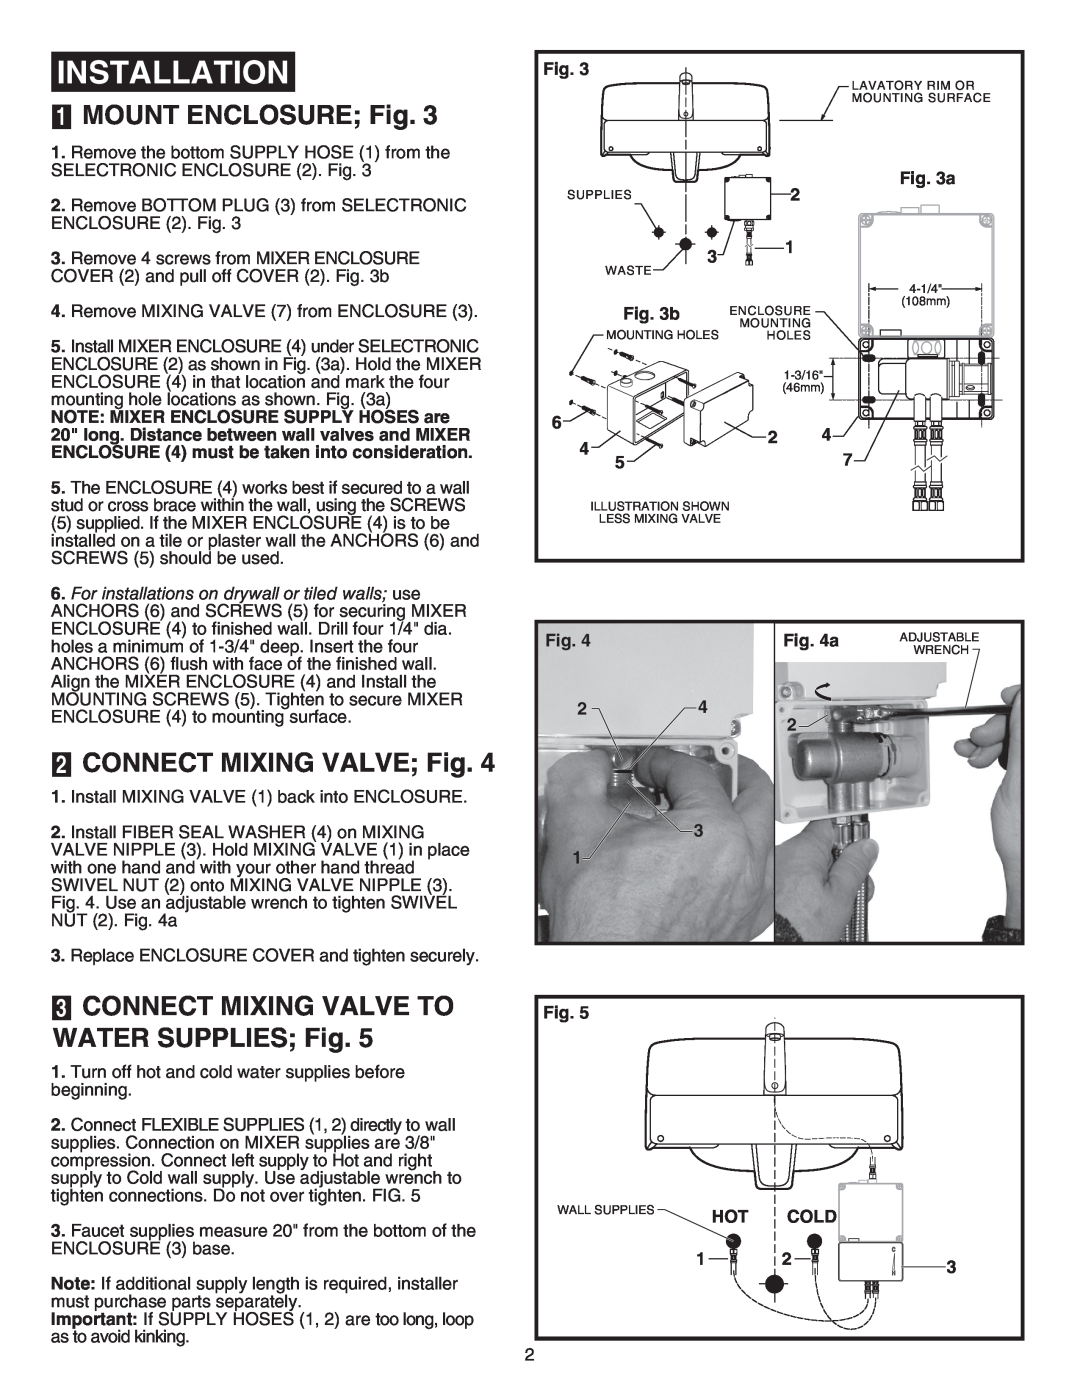 American Standard 605XTMV installation instructions Installation, 1MOUNT ENCLOSURE Fig, 2CONNECT MIXING VALVE Fig 